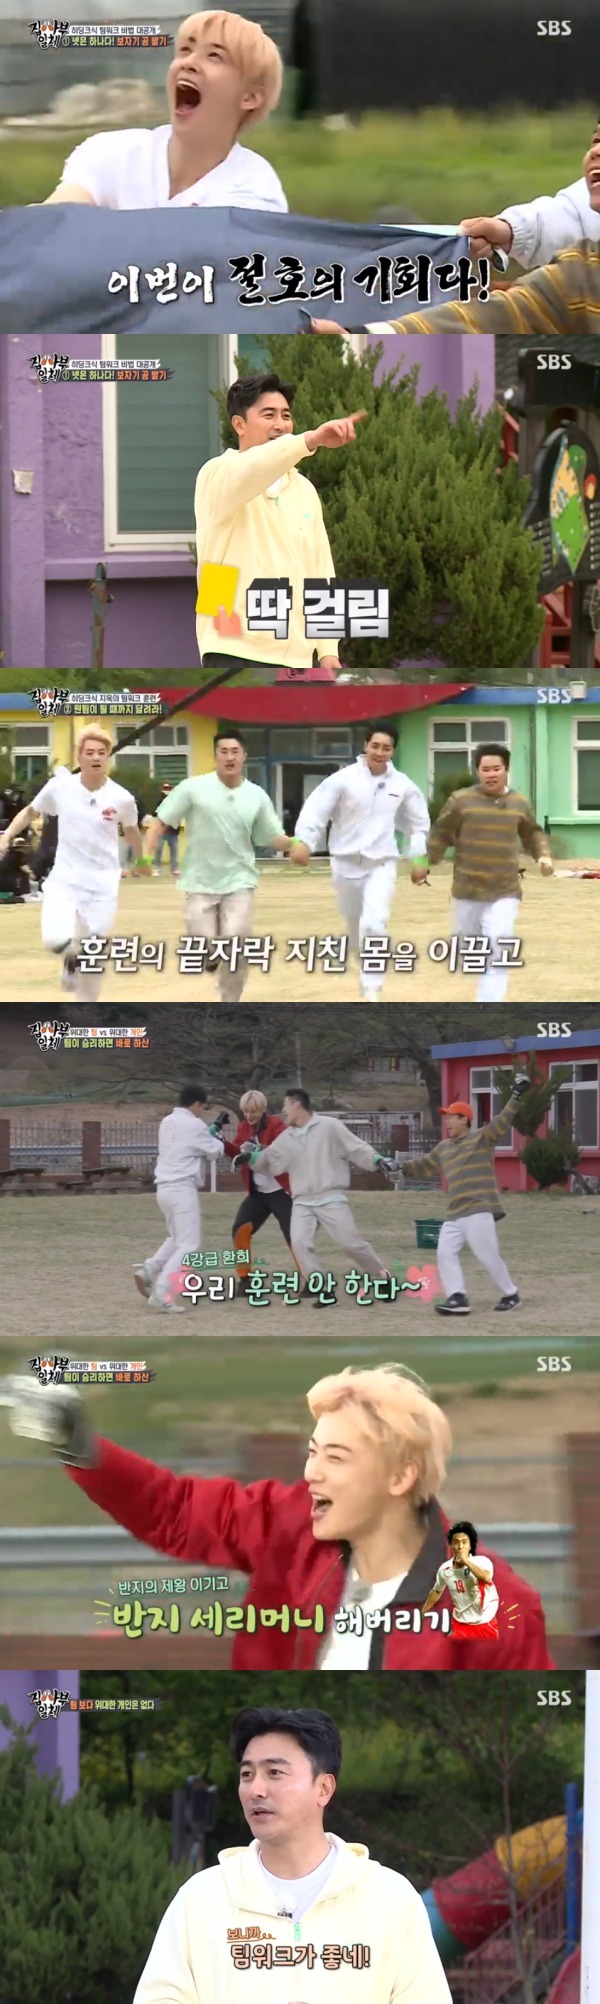 Seoul =) = Ahn Jung-hwan admired the teamwork of All The Butlers members.On SBS All The Butlers broadcast on the 16th, Ahn Jung-hwan started teamwork training.Yang Se-hyeong Kim Dong-Hyun Lee Seung-gi Cha Jung Eun-woo trained to receive the ball as a bowl.When he failed, Kim Dong-Hyun Lee Seung-gi Chas finger went to Yang Se-hyeong.Yang Se-hyeong cried, Im going home in a sad heart; Ahn Jung-hwan said, There is no consideration.Is it possible to divide into teamwork training? The crooked Yang Se-hyeong did not move even when the ball came.Lee Seung-gi toppled the field bridge over Yang Se-hyeong, who enthused: Please praise me one by one.Your Human came back to heart: next attempt was almost successful, but Yang Se-hyeong was found to have been hand-in-hand.The next training was a round-trip run; all four Humans had to come in in 20 seconds; Yang Se-hyeong was unsure of running; the first result was 25 seconds.Ahn Jung-hwan advised that a slower human should be pulled by a quick human; the second time was a slower 32 seconds.Your Human expressed dissatisfaction with Training: Ahn Jung-hwan said it was something he had learned from Hiddink.Lee Seung-gi said that training does not seem to be a purpose.Ahn Jung-hwan revealed his hidden intention in training that he could win by dragging the slowest human.Ive tried it, so I know how it feels, said Ahn Jung-hwan, looking at your struggling human. When its really hard, I hate the director at first, and then I get lost.Youre going to get it off, said Ahn Jung-hwan, who last downgraded his target to 38 seconds, instead tying your Humans arm.A little faster, Jung Eun-woo, Kim Dong-Hyun, ran wide from the outside. Your Human succeeded in his last chance and enjoyed his joy.Im sorry Im the worst run, but I feel more grateful for the members pull, Yang Se-hyeong said.Your Human finally had a break. The bound arms were still there. They moved together when they turned off the lights.The menu was Samgyetang, especially with Jung Eun-woo and Kim Dong-Hyun, both hands tied.While struggling but tasty, Yang Se-hyeong suggested eating ramen; your Human wisely resolved the disagreement and returned with ramen.Its good for teamwork, its like a team is being made, said Ahn Jung-hwan, who admired the team.Lee Seung-gi offered Ahn Jung-hwan a bet to stop training; Ahn Jung-hwan and four Human had a 1:4 penalty shootout.Ahn Jung-hwan kicked the ball in a different direction from where he predicted, but Yang Se-hyeong blocked it.Your Human tricked Ahn Jung-hwan into the eye-breaking move and scored; Ne Human was proud, saying individuals cant beat the team.Ahn Jung-hwans second attack was also blocked by four Humans defences, while four Humans attacks were successful twice in a row.Ahn Jung-hwan genuinely shot to win; Kim Dong-Hyun avoided a cold ball by Ahn Jung-hwan, which eventually tied.In the final attack that Ahn Jung-hwan could reverse, Ahn Jung-hwan hit the goal post; eventually the members won and the training ended.Chan Eun-woo followed the ring kiss ceremony, and Ahn Jung-hwan admired it, saying, There is certainly no game greater than the team.